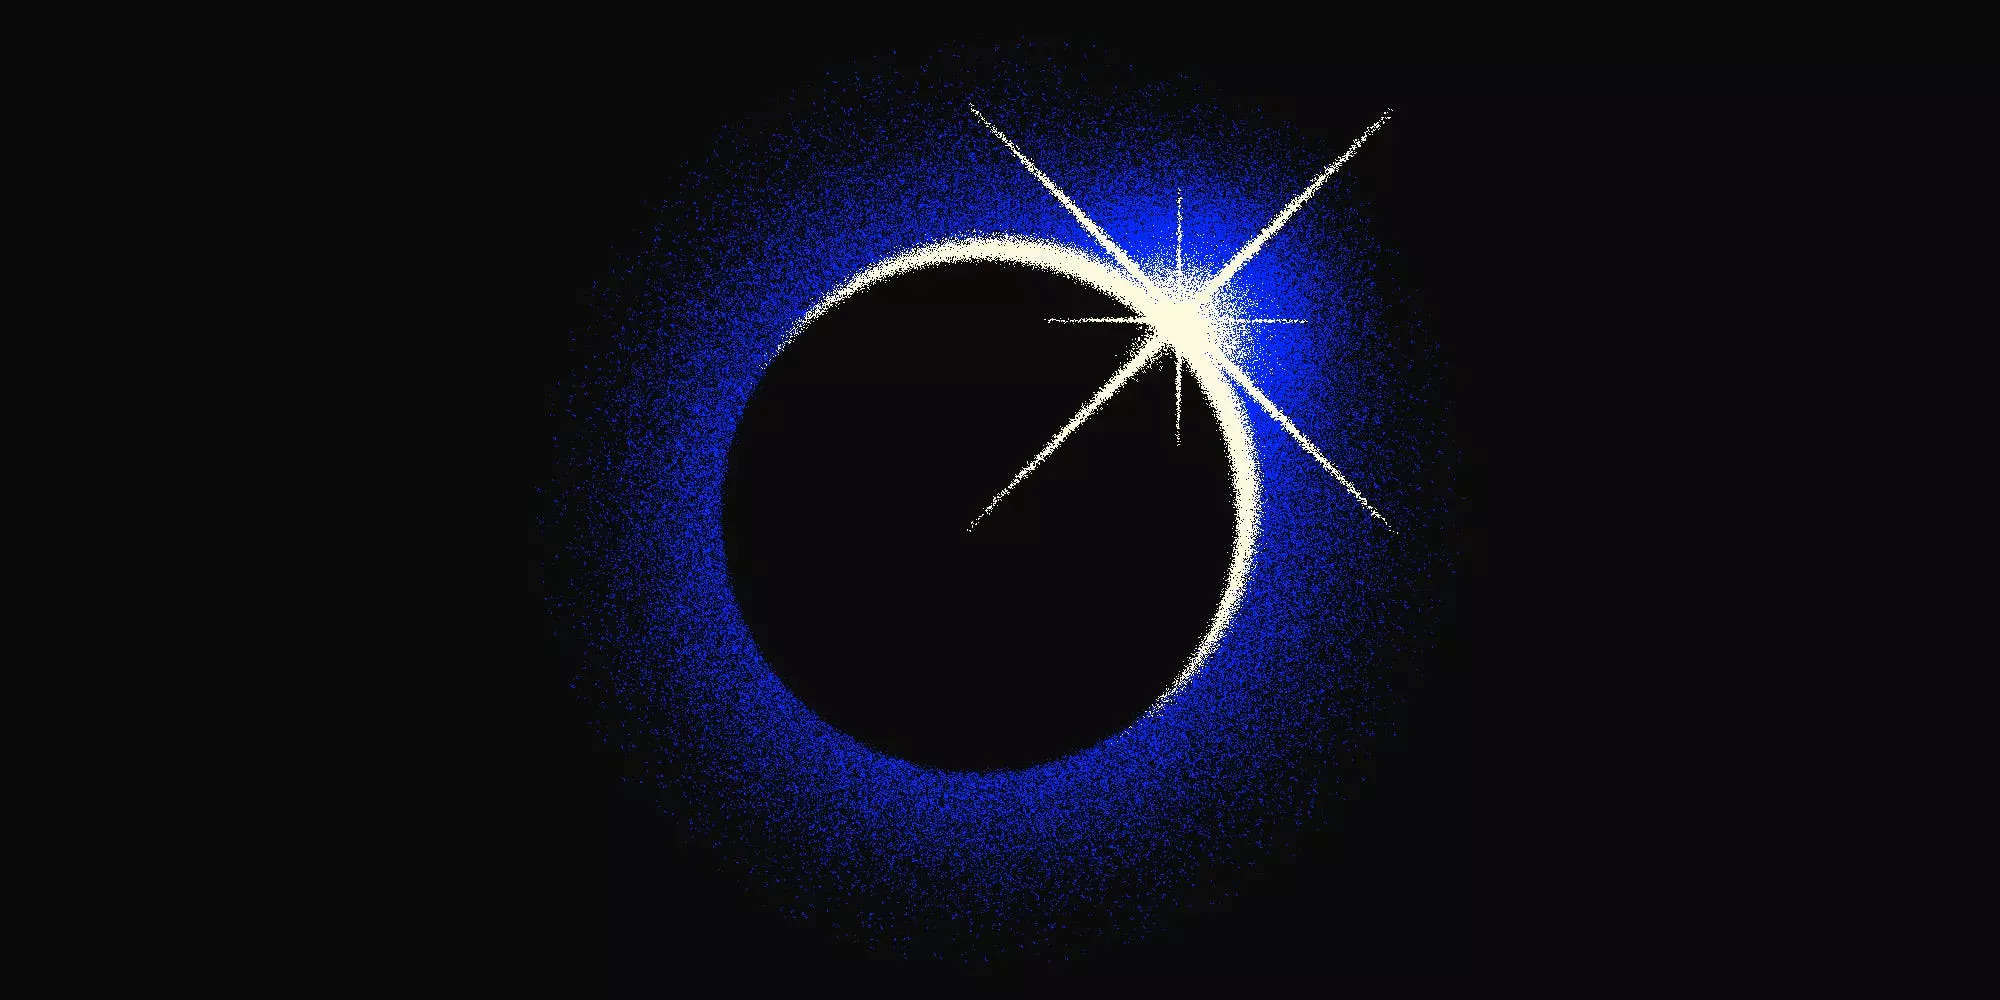 An illustration of an eclipse.